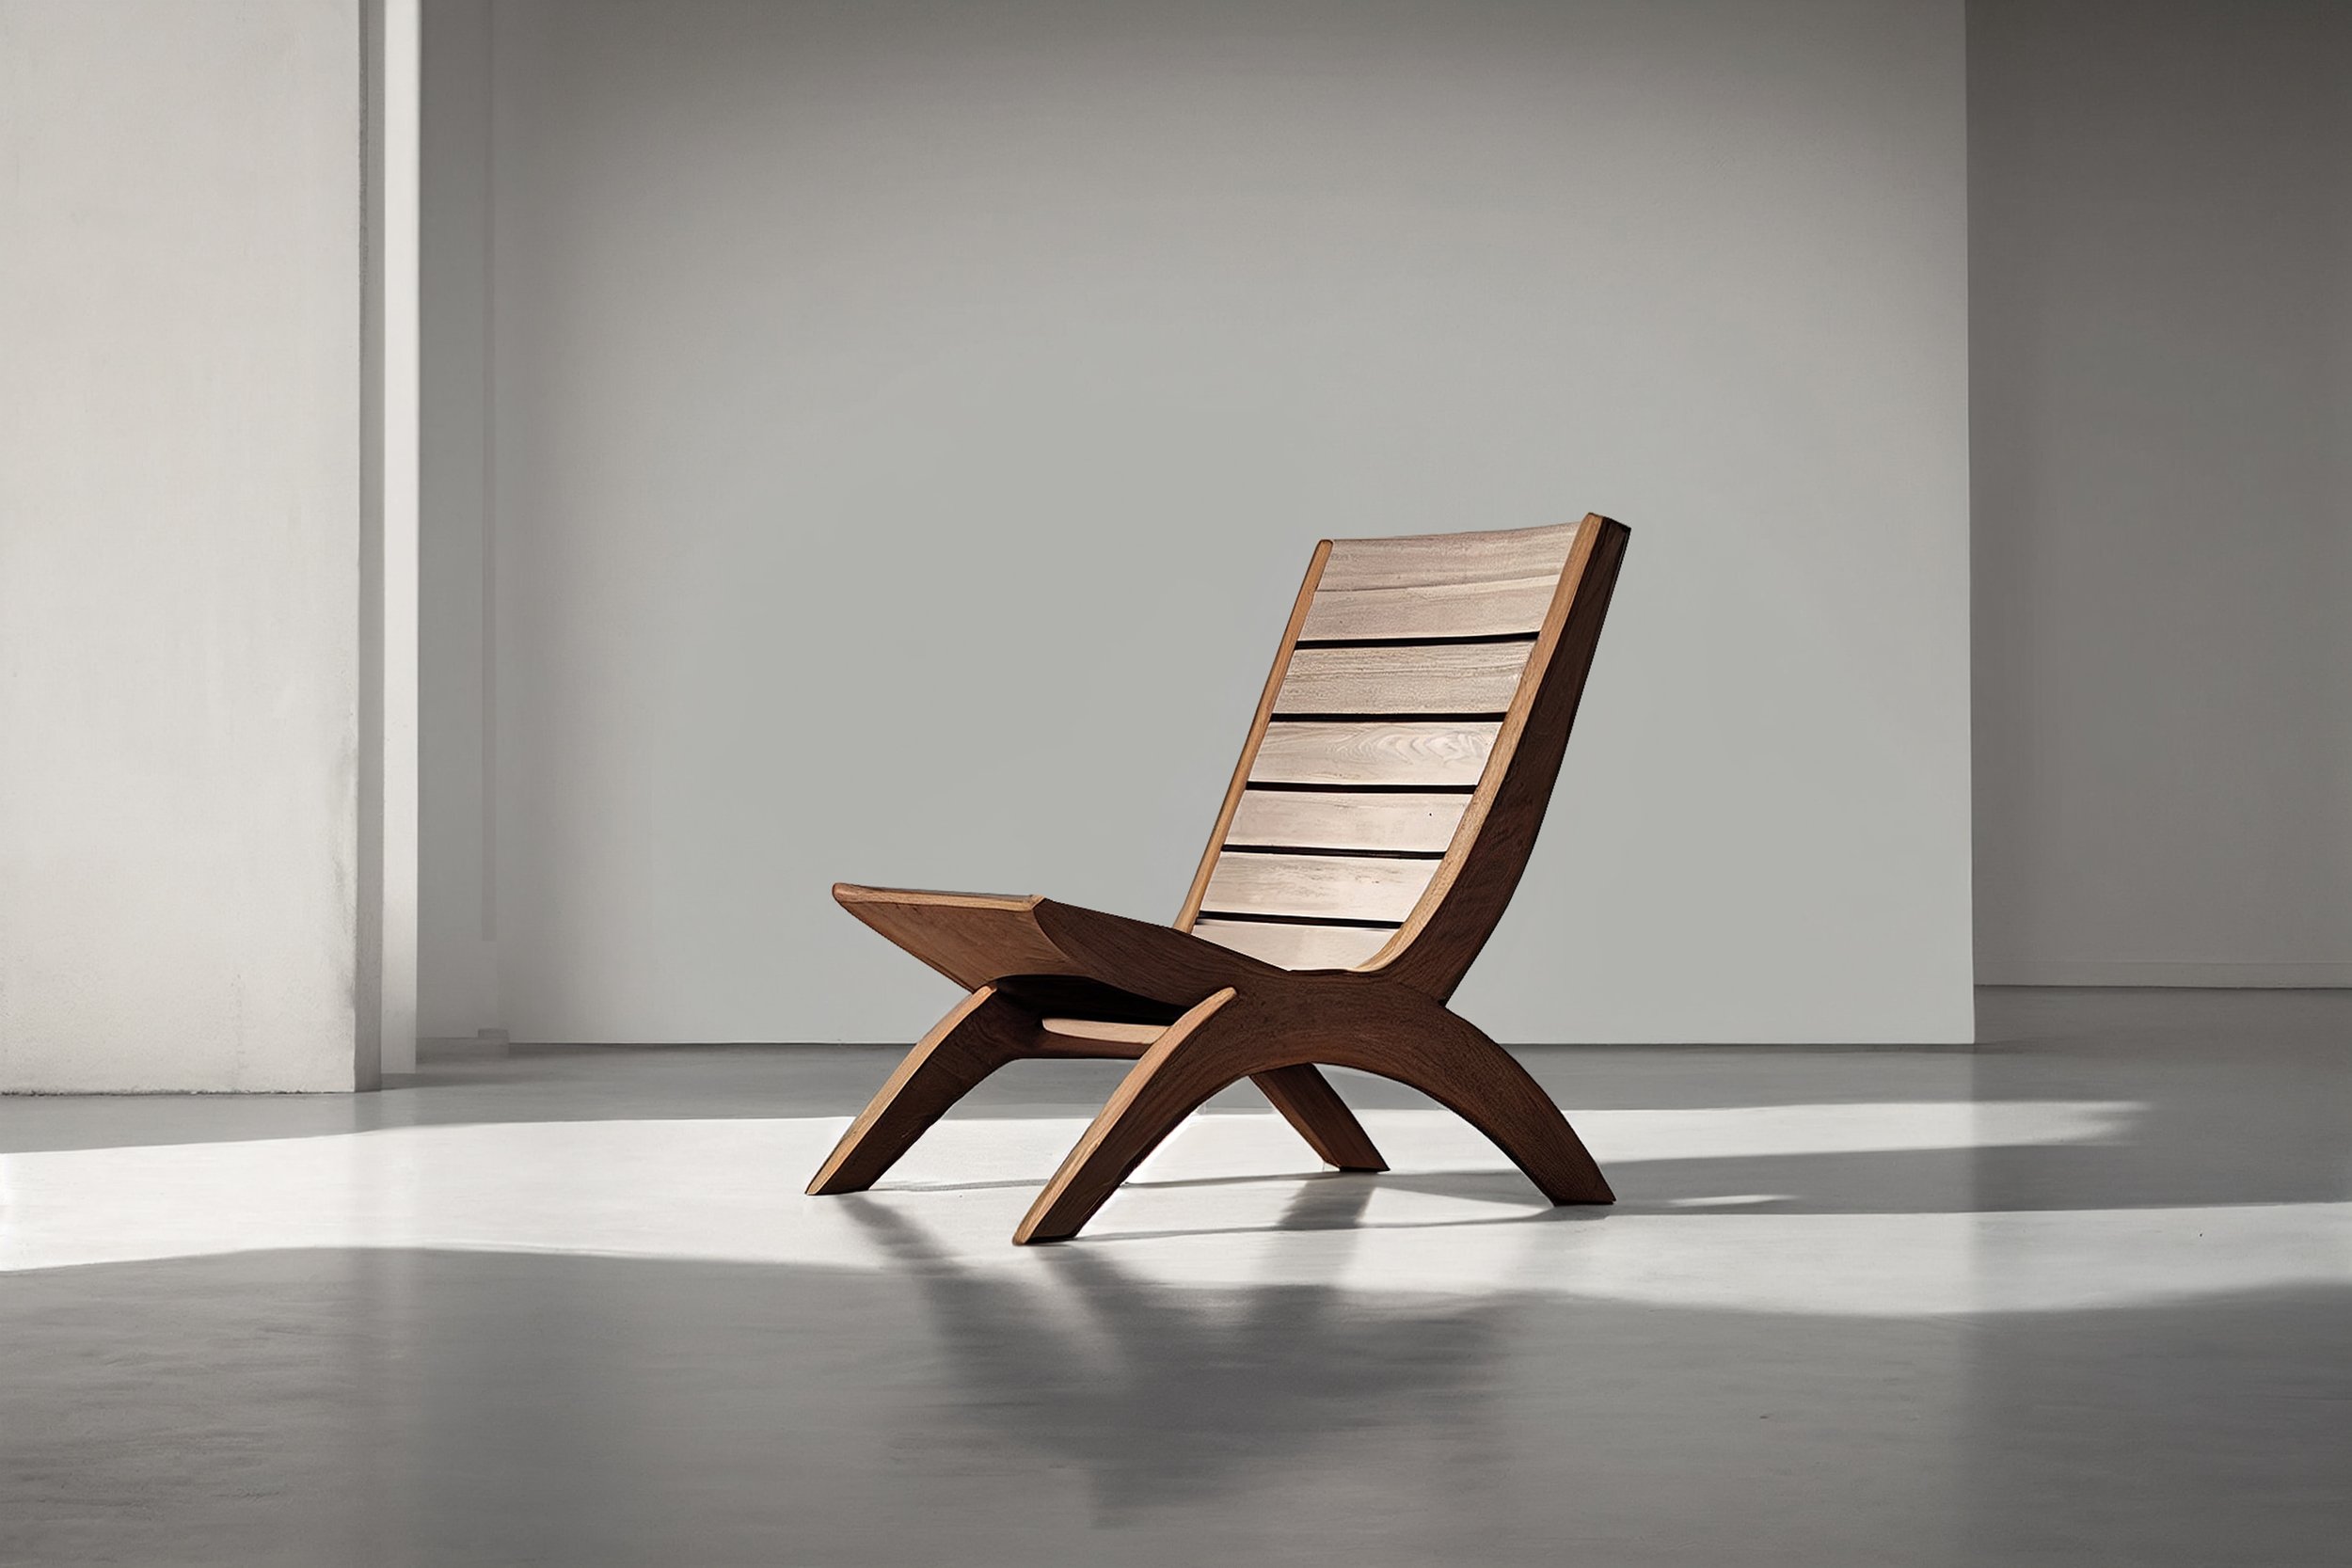 Butaque Lounge Chair Made of Solid Wood Inspired in Clara Porset Design  — 4.jpg